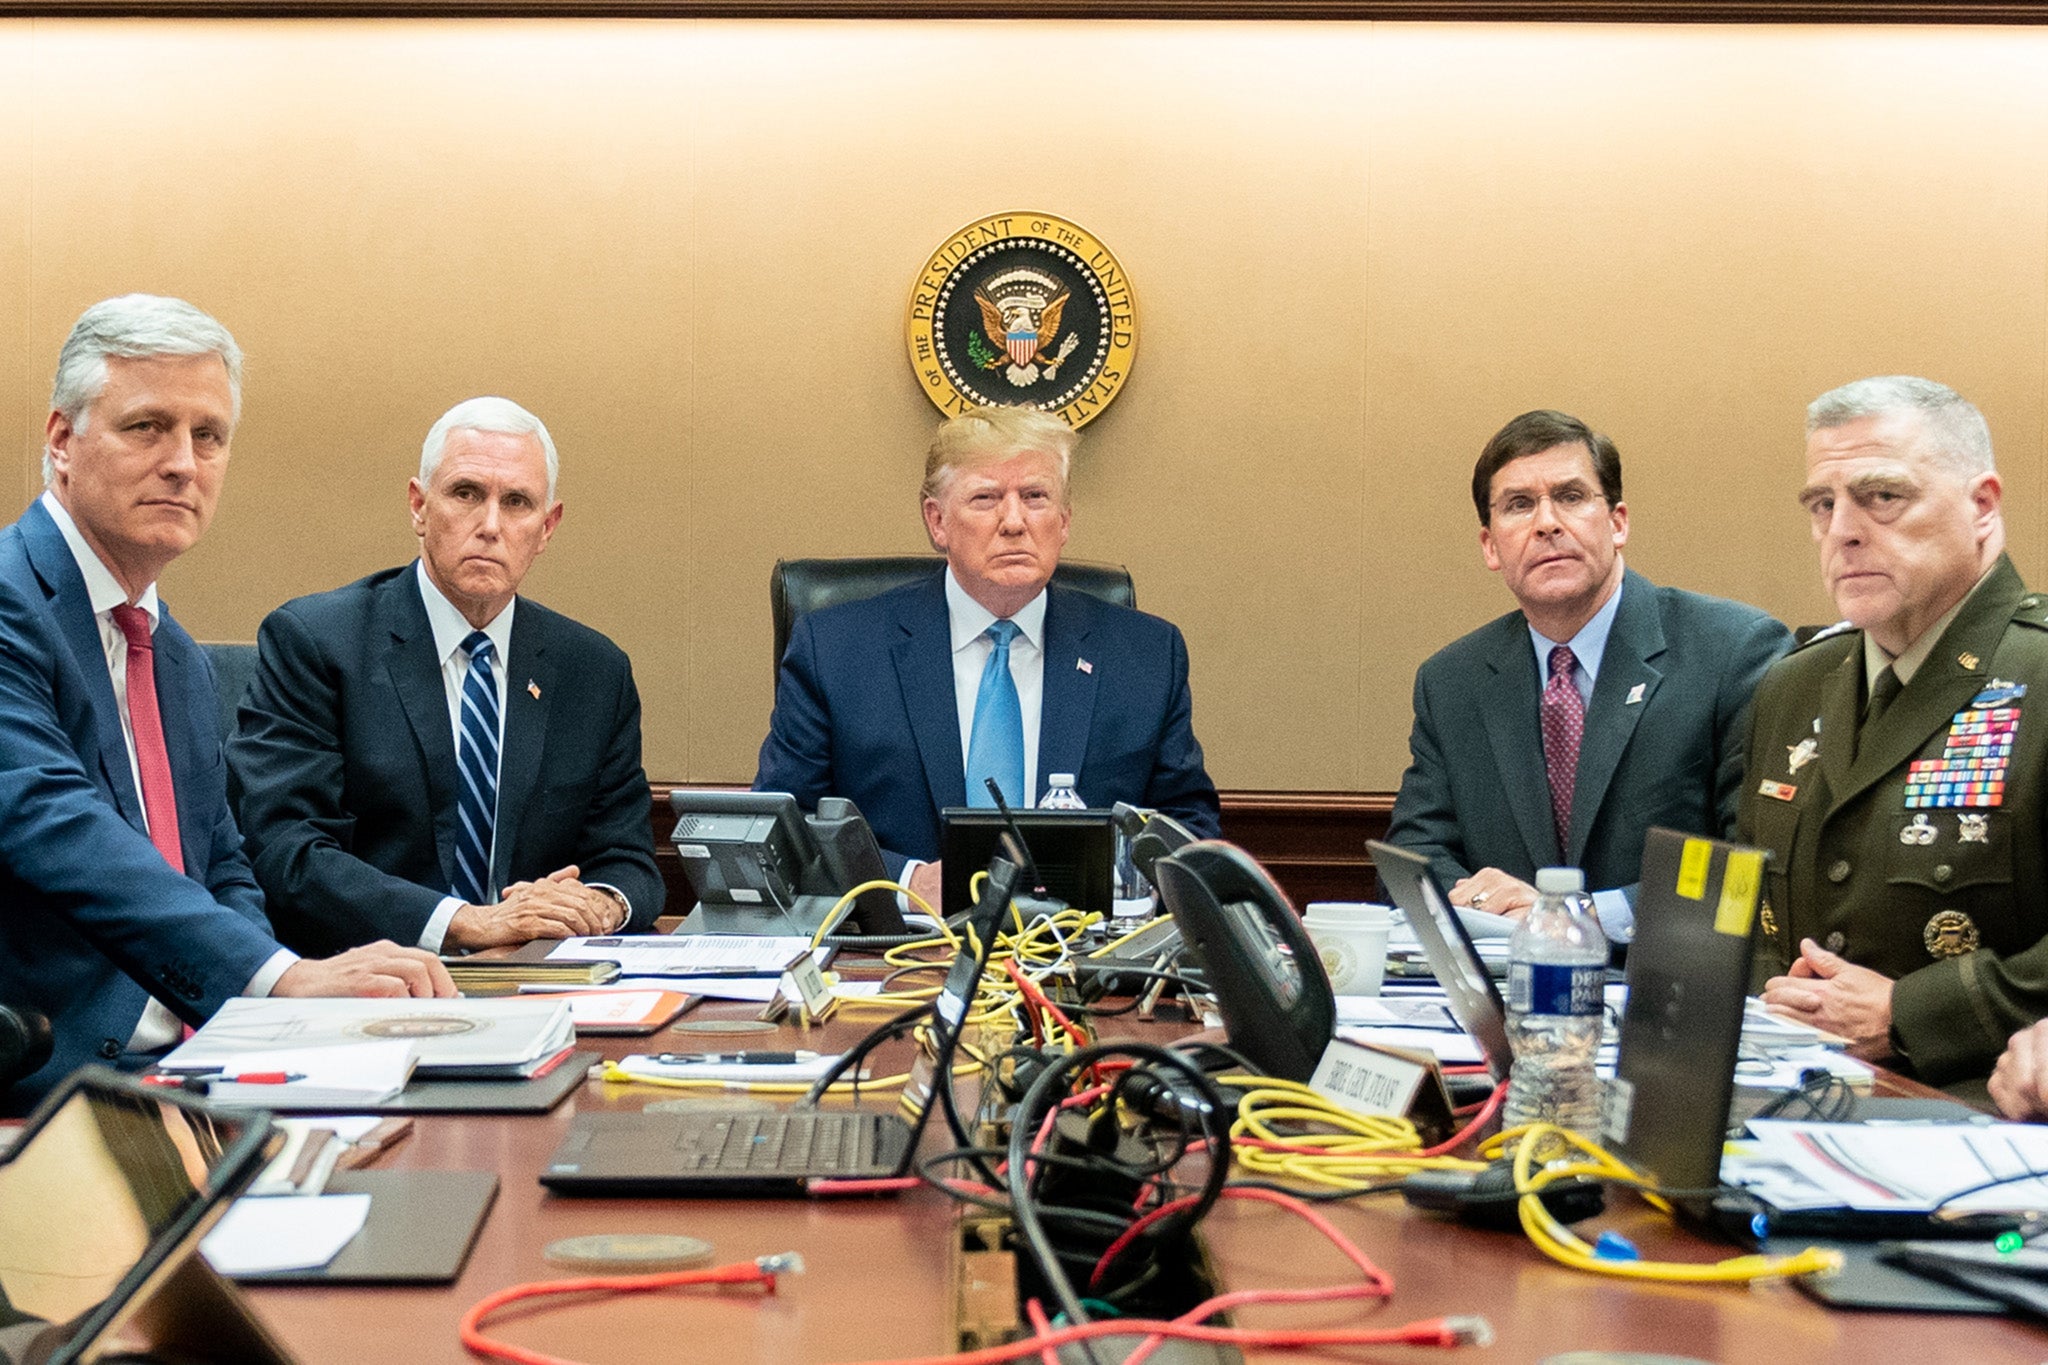 Donald Trump with Mike Pence, Robert O’Brien, Mark Esper, who was fired this week, and Mark Milley